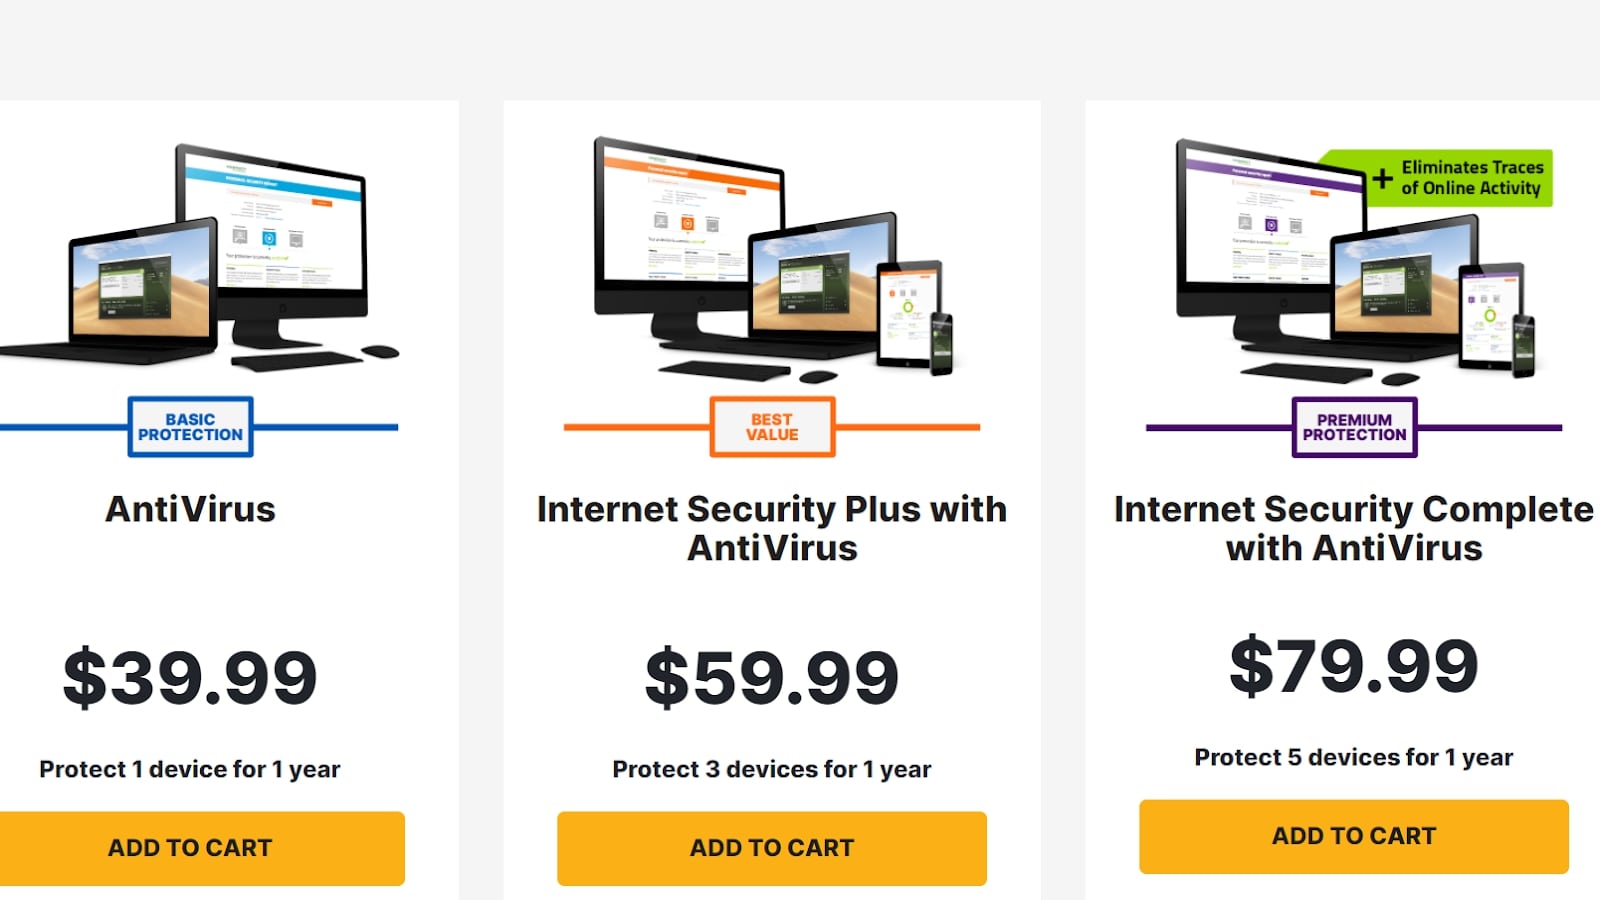 webroot secureanywhere internet security complete 2019 review